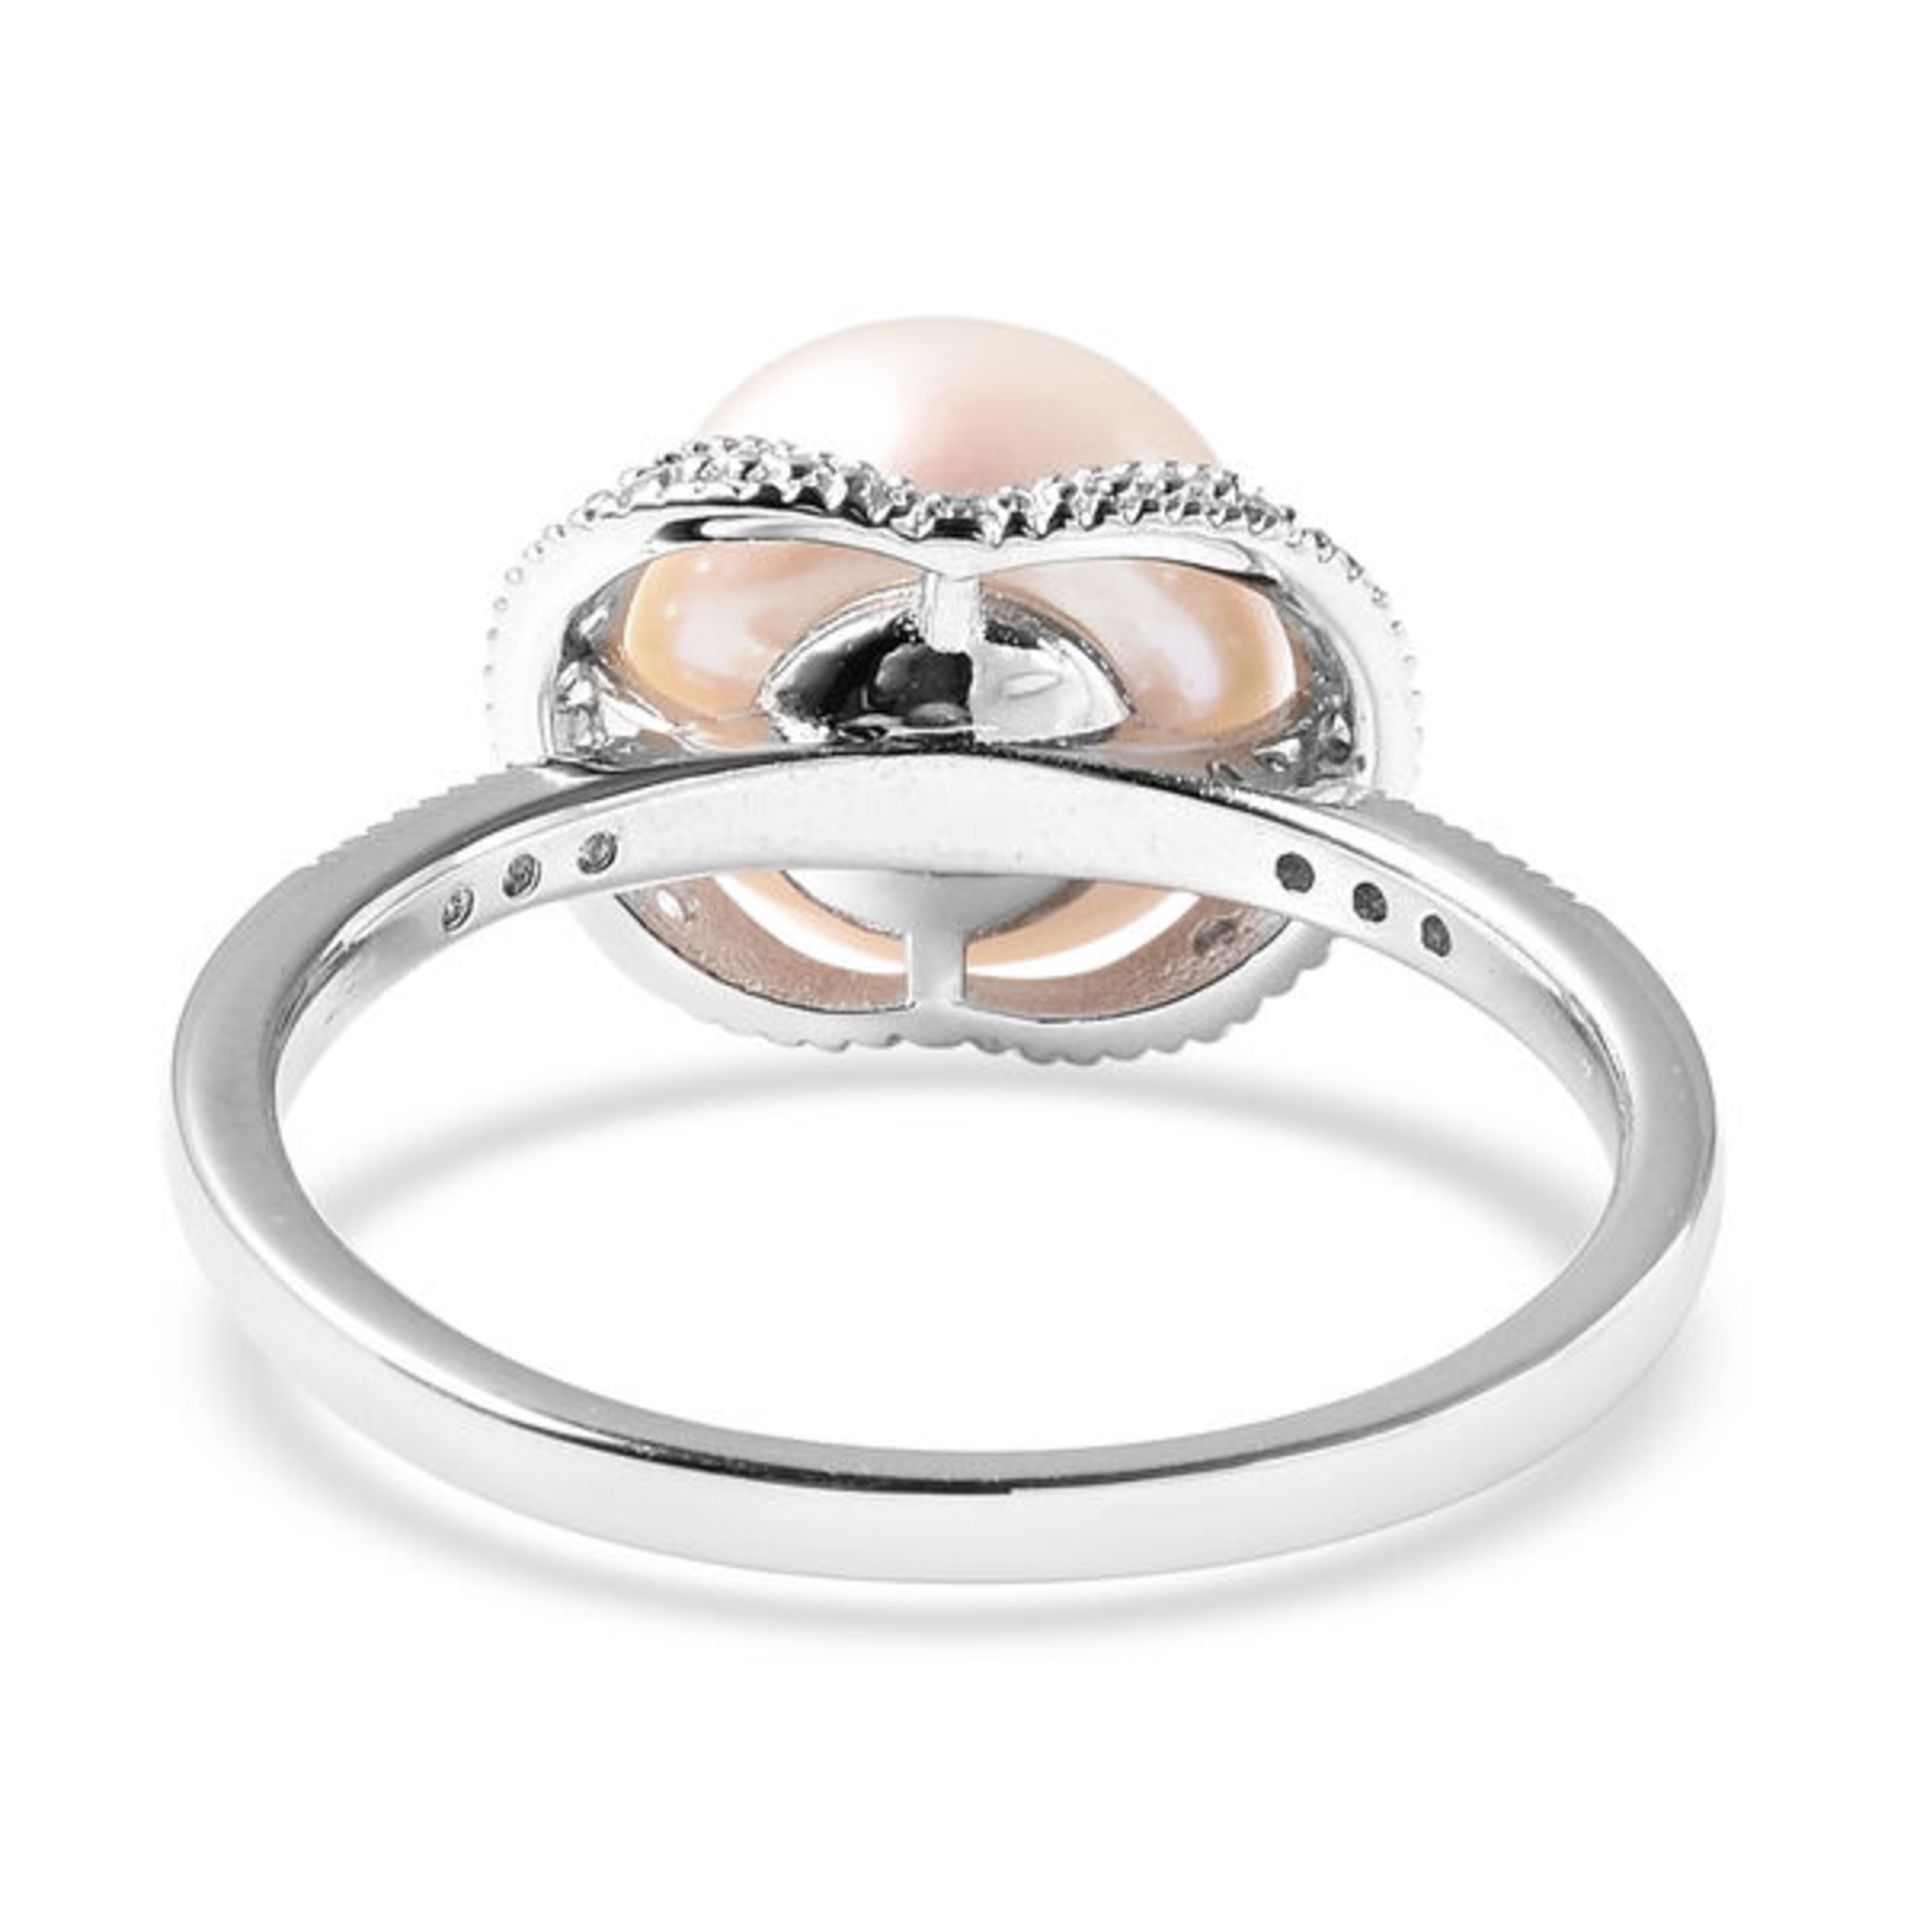 New! Freshwater White Pearl and Simulated Diamond Ring In Rhodium Overlay - Image 3 of 3